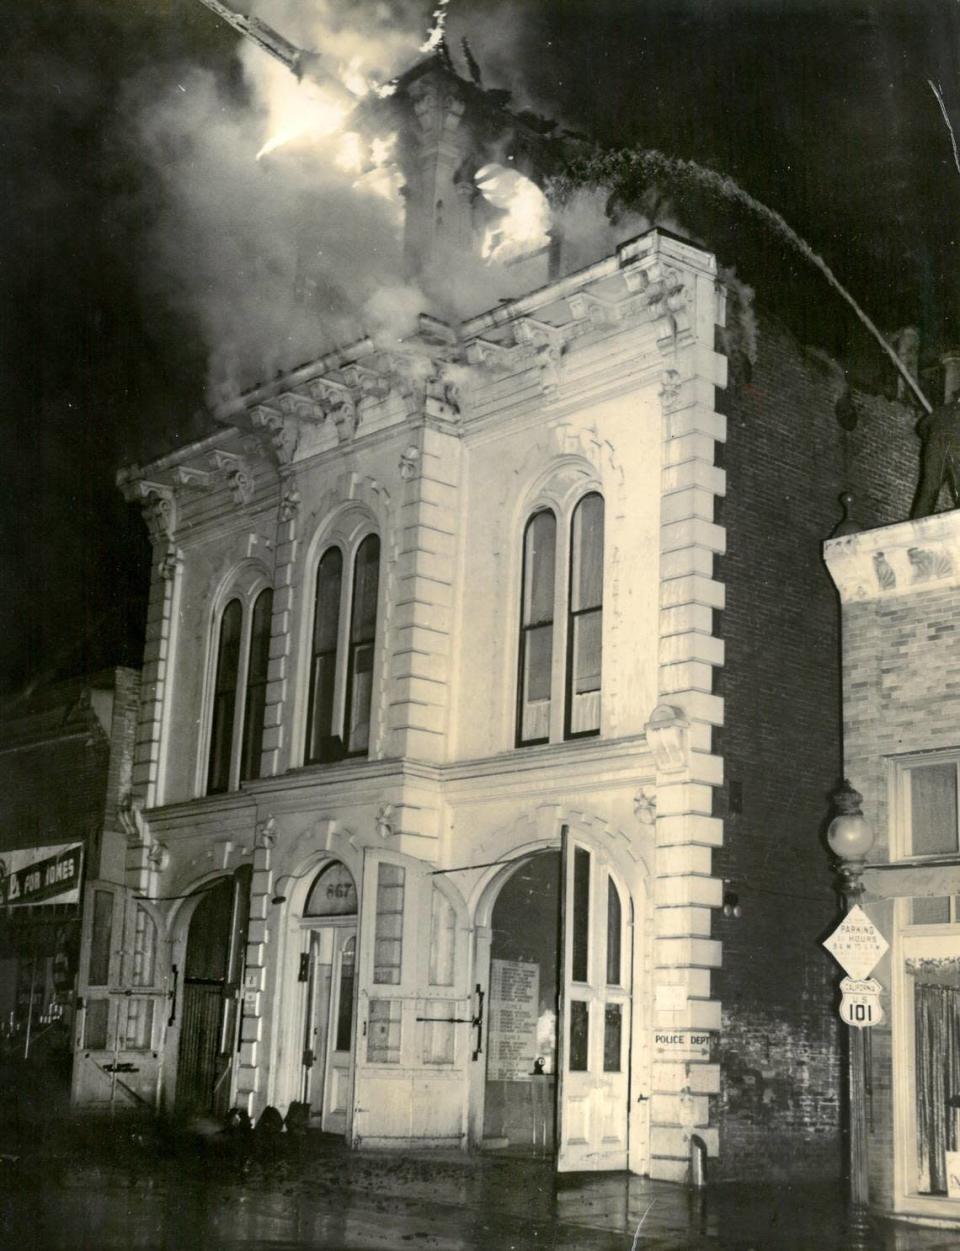 Fire struck San Luis Obispo’s historic fire house and city hall on Higuera Street on Aug. 28, 1938. The police department was down the alley, and a jail was built behind this now-destroyed building that still stands today. A Highway 101 sign can be seen at right.